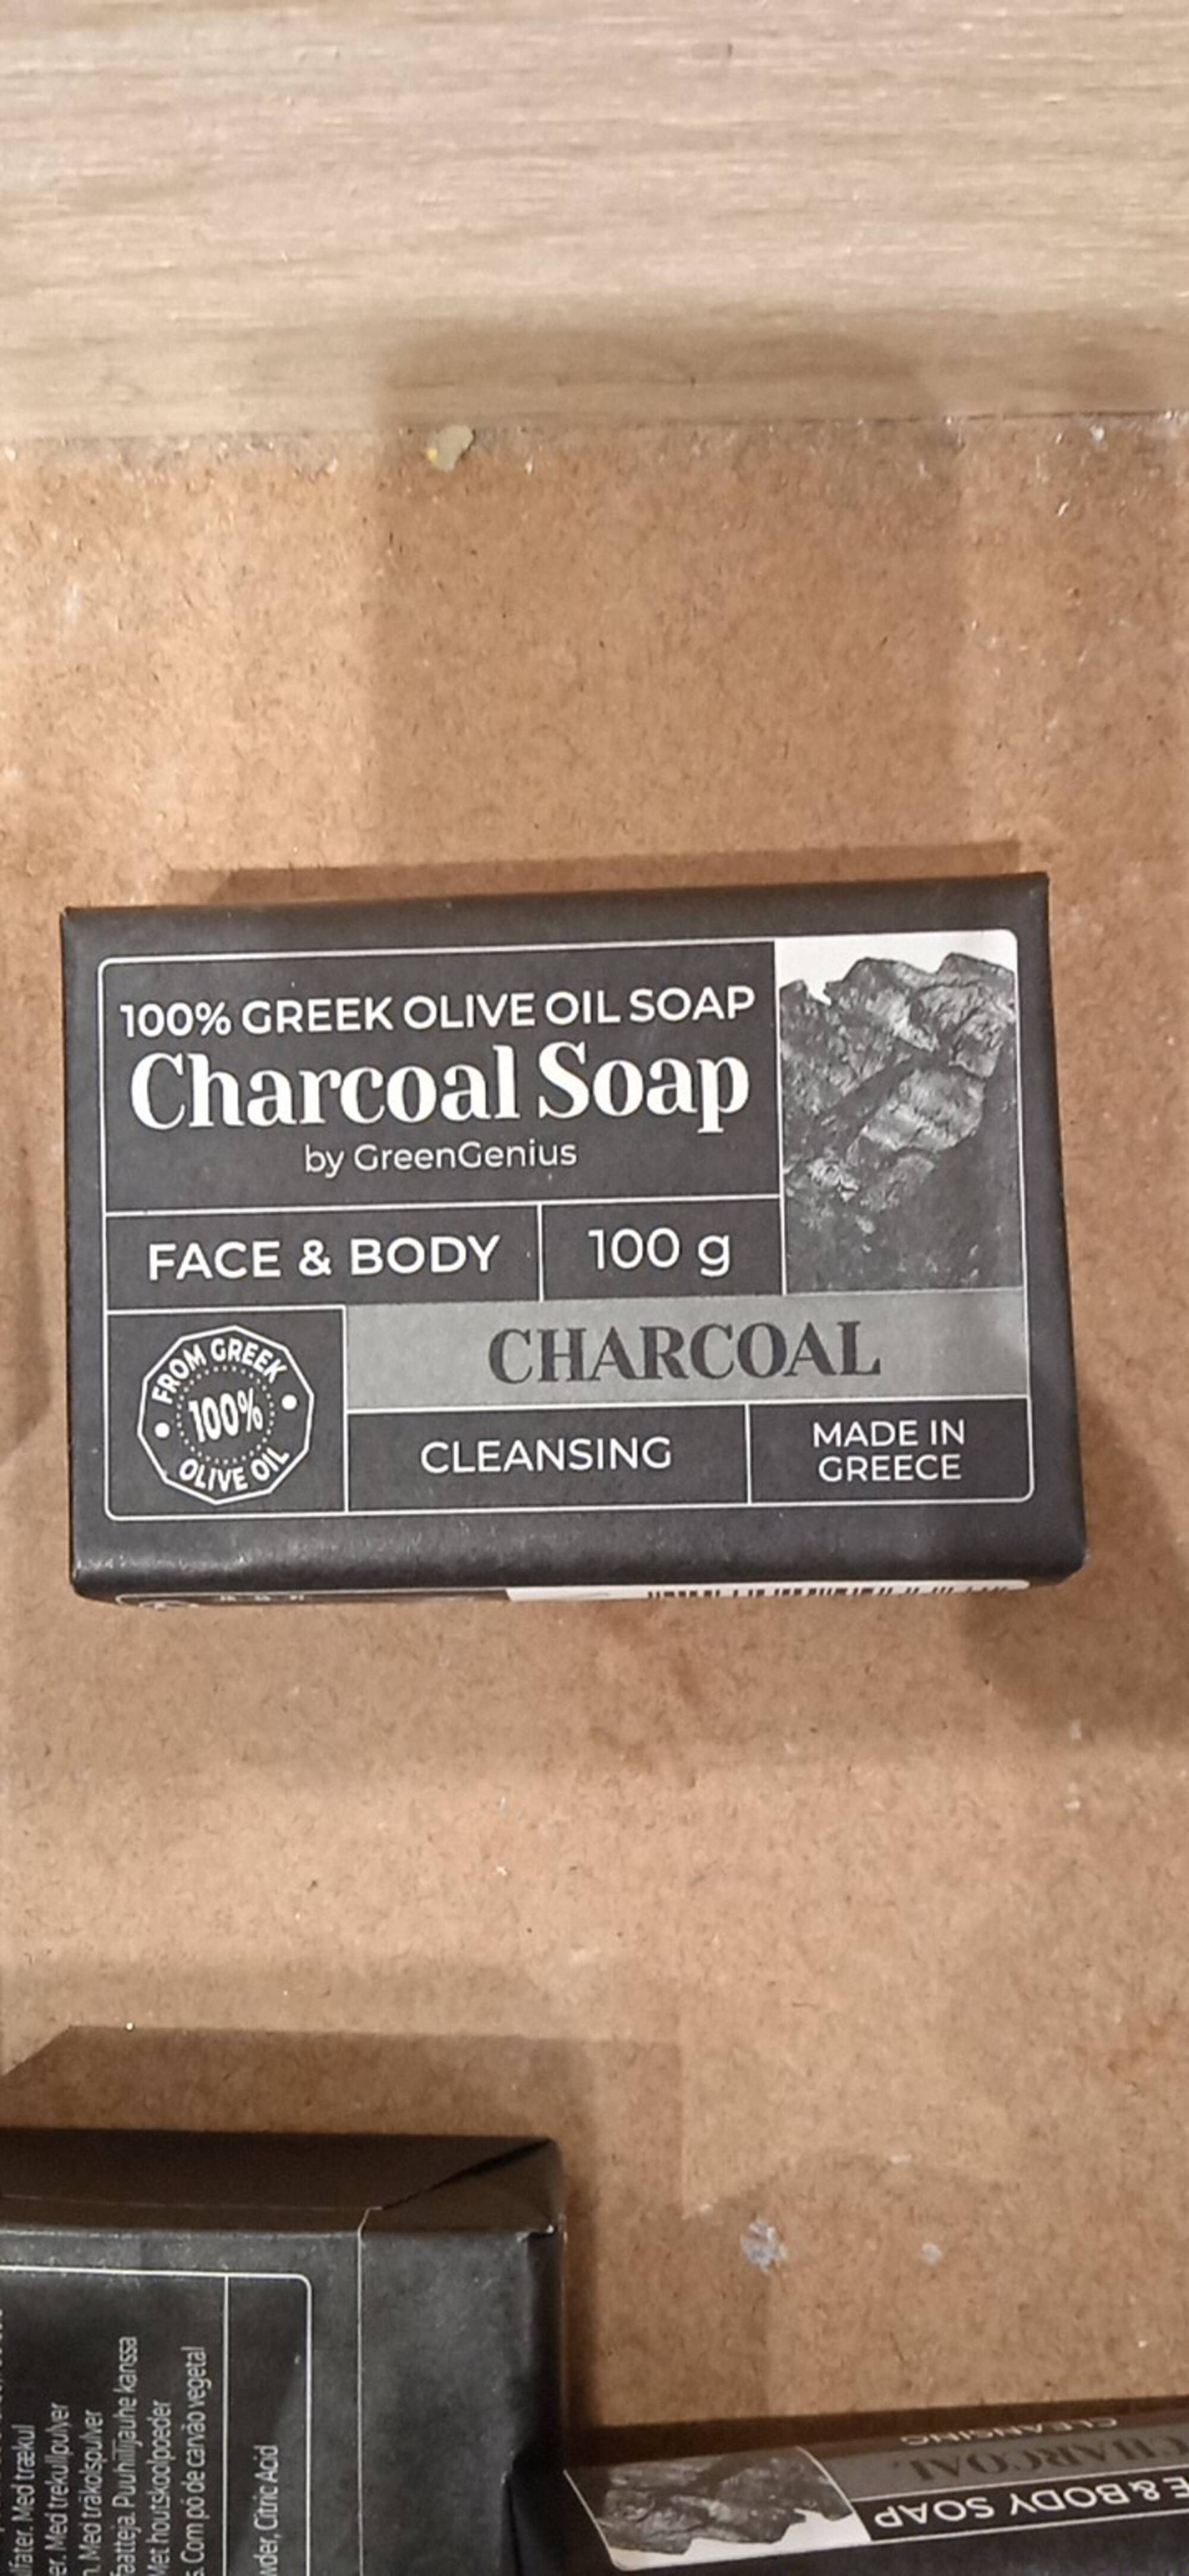 GREEN GENIUS - Charcoal soap face & body